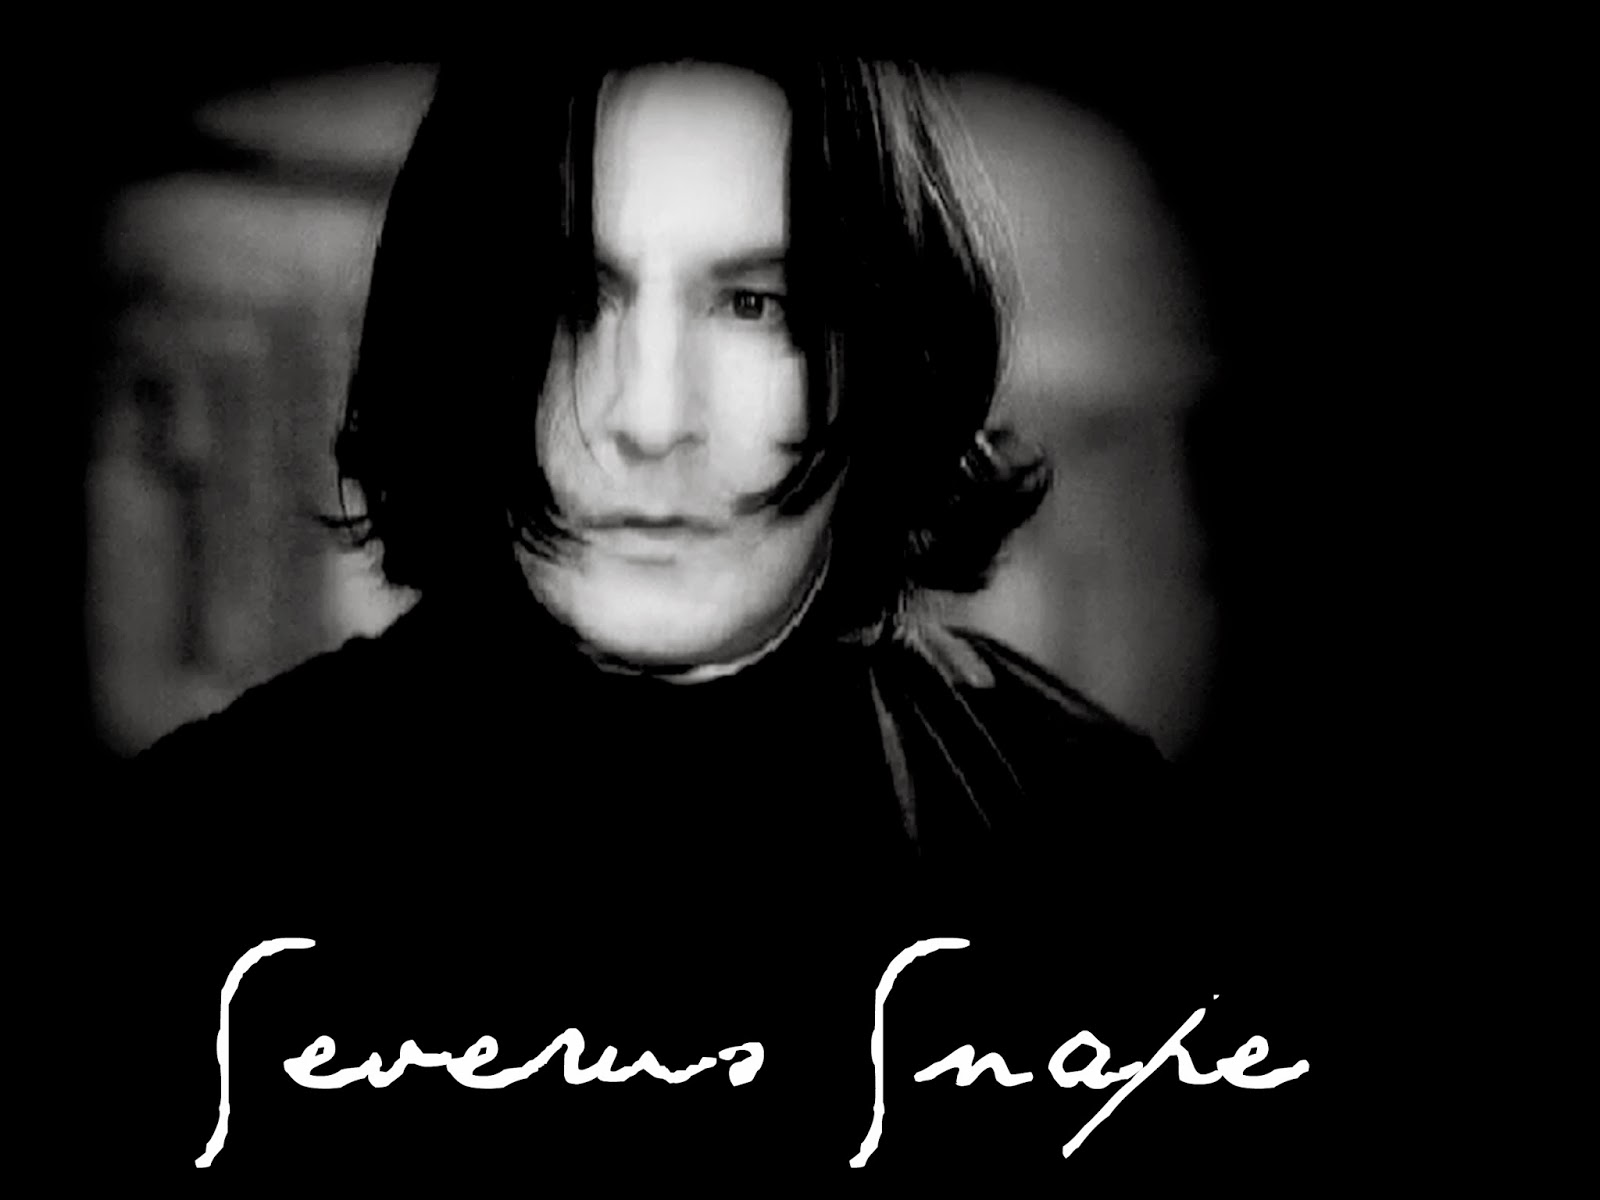 snape wallpaper,face,photograph,black,facial expression,black and white